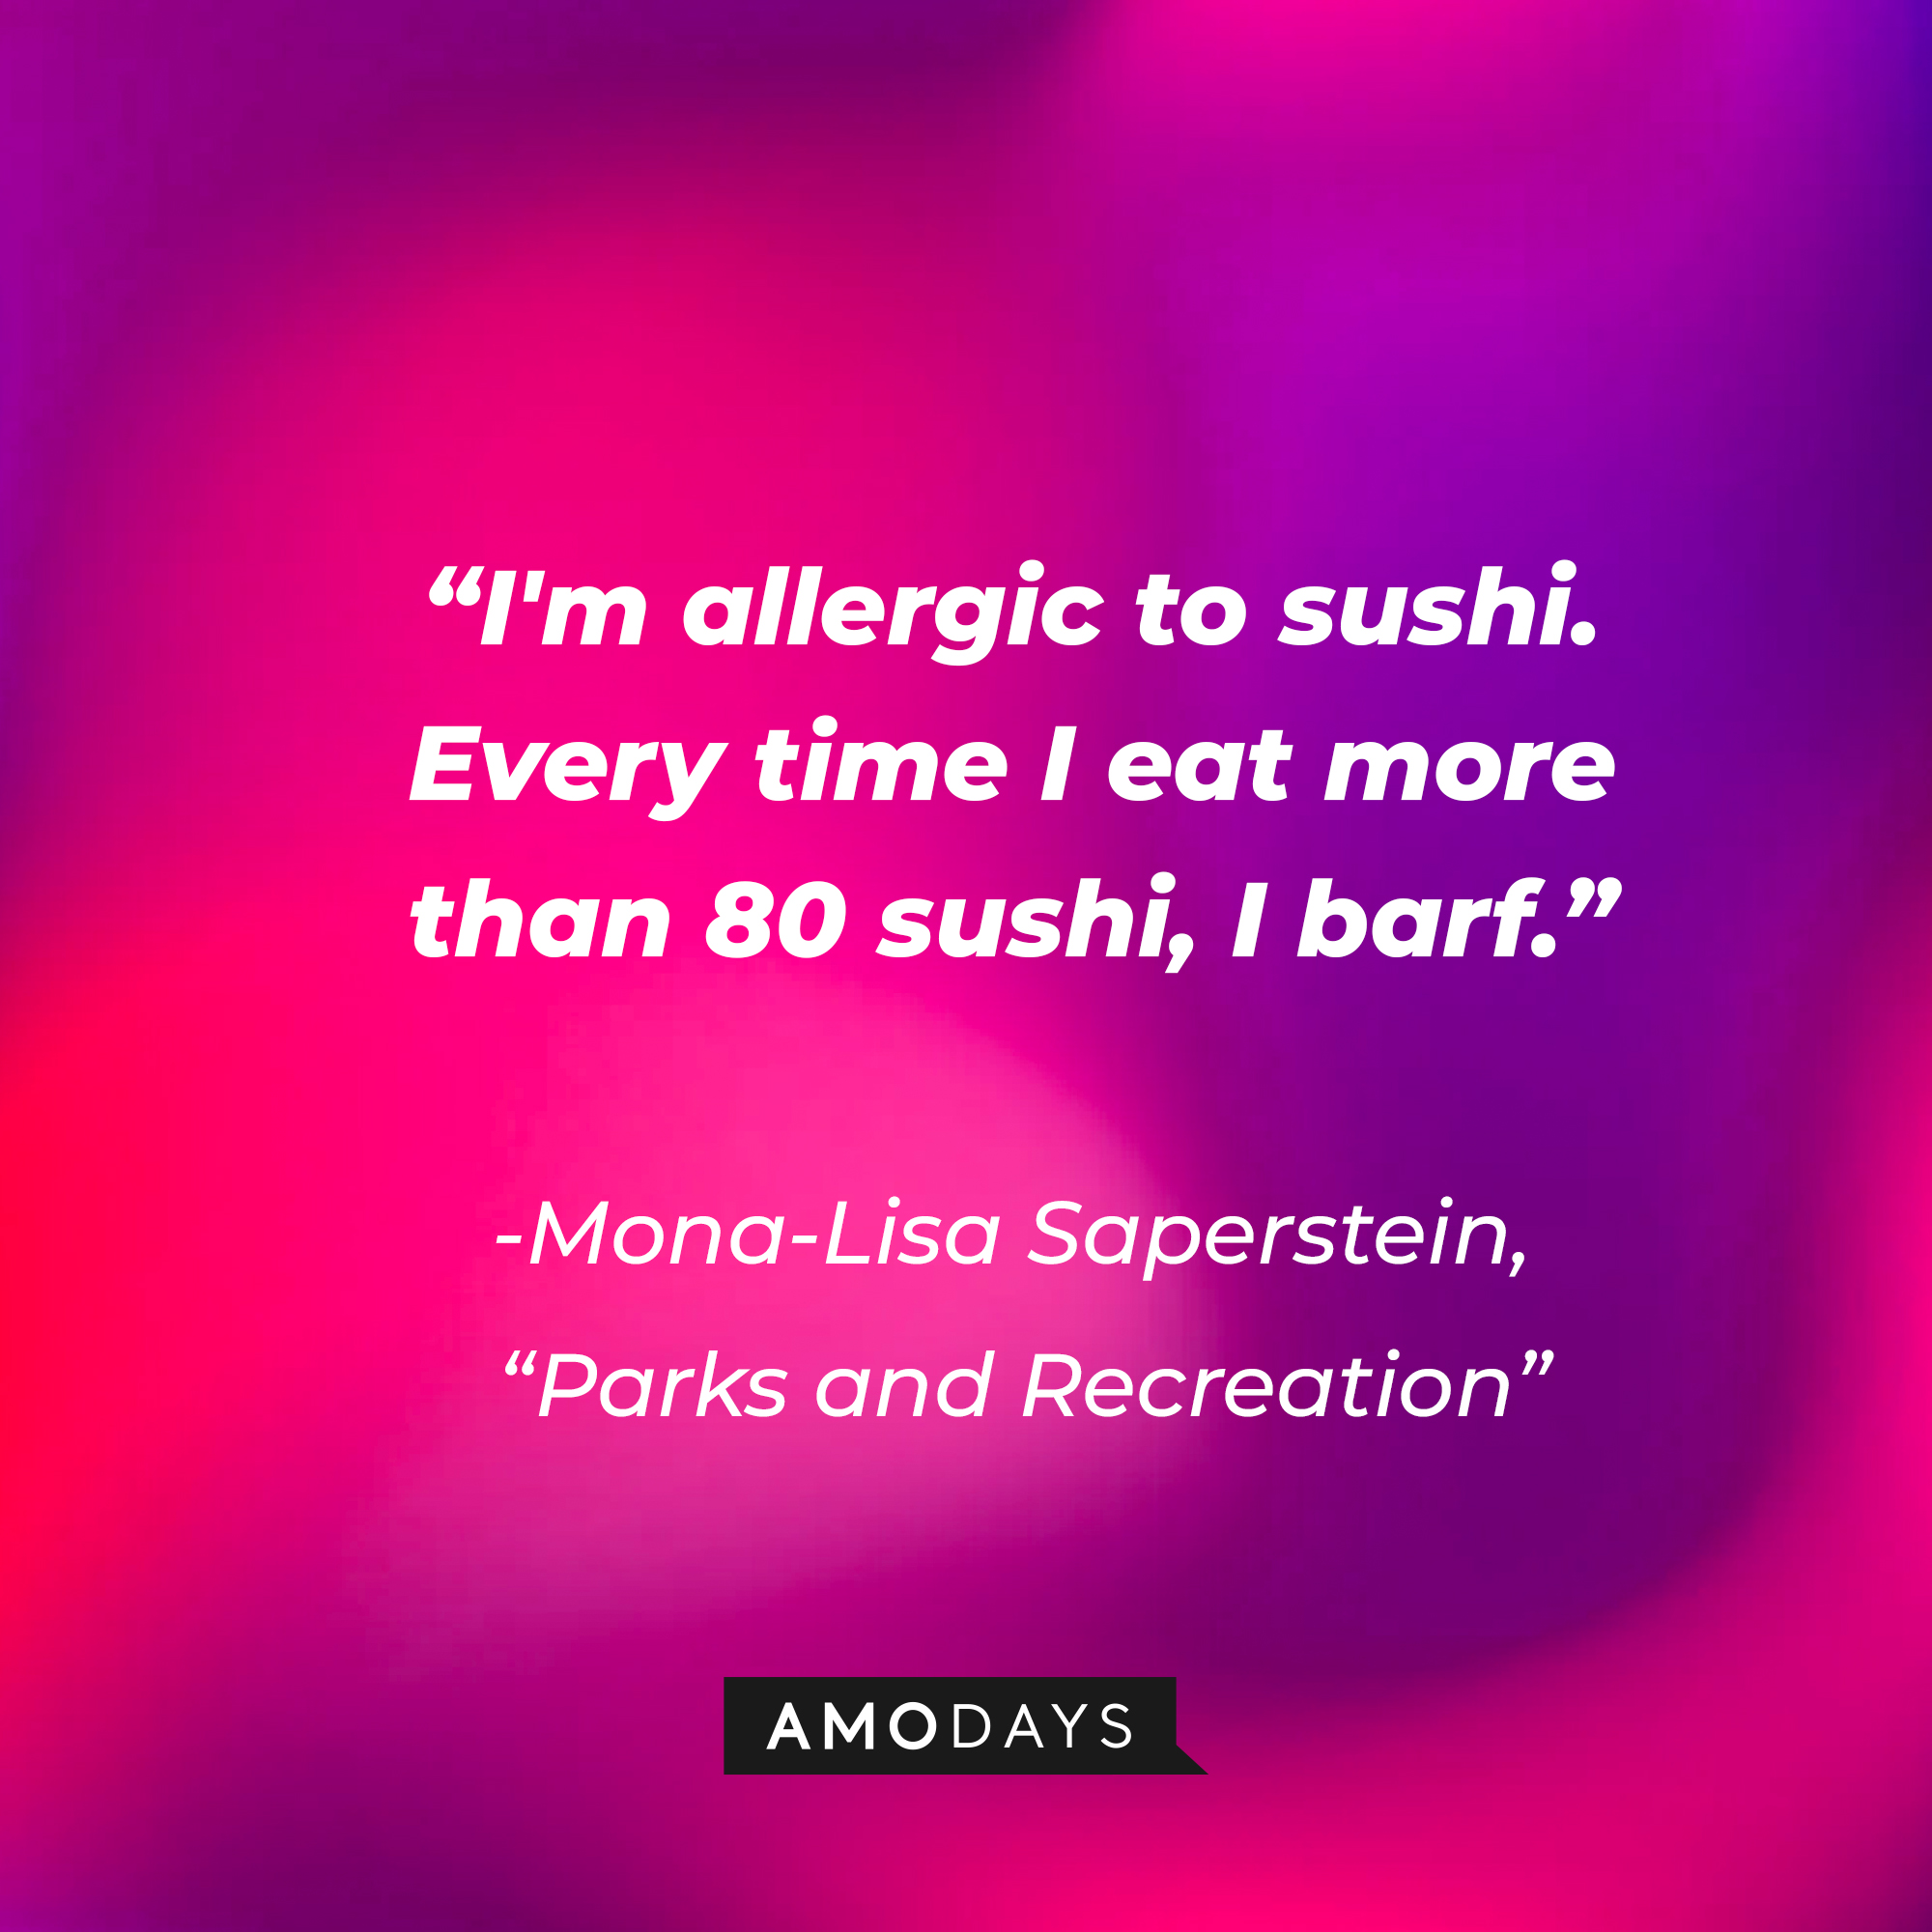 Mona-Lisa Saperstein's quote on "Parks and Recreation:" "I'm allergic to sushi. Every time I eat more than 80 sushi, I barf." | Source: AmoDays